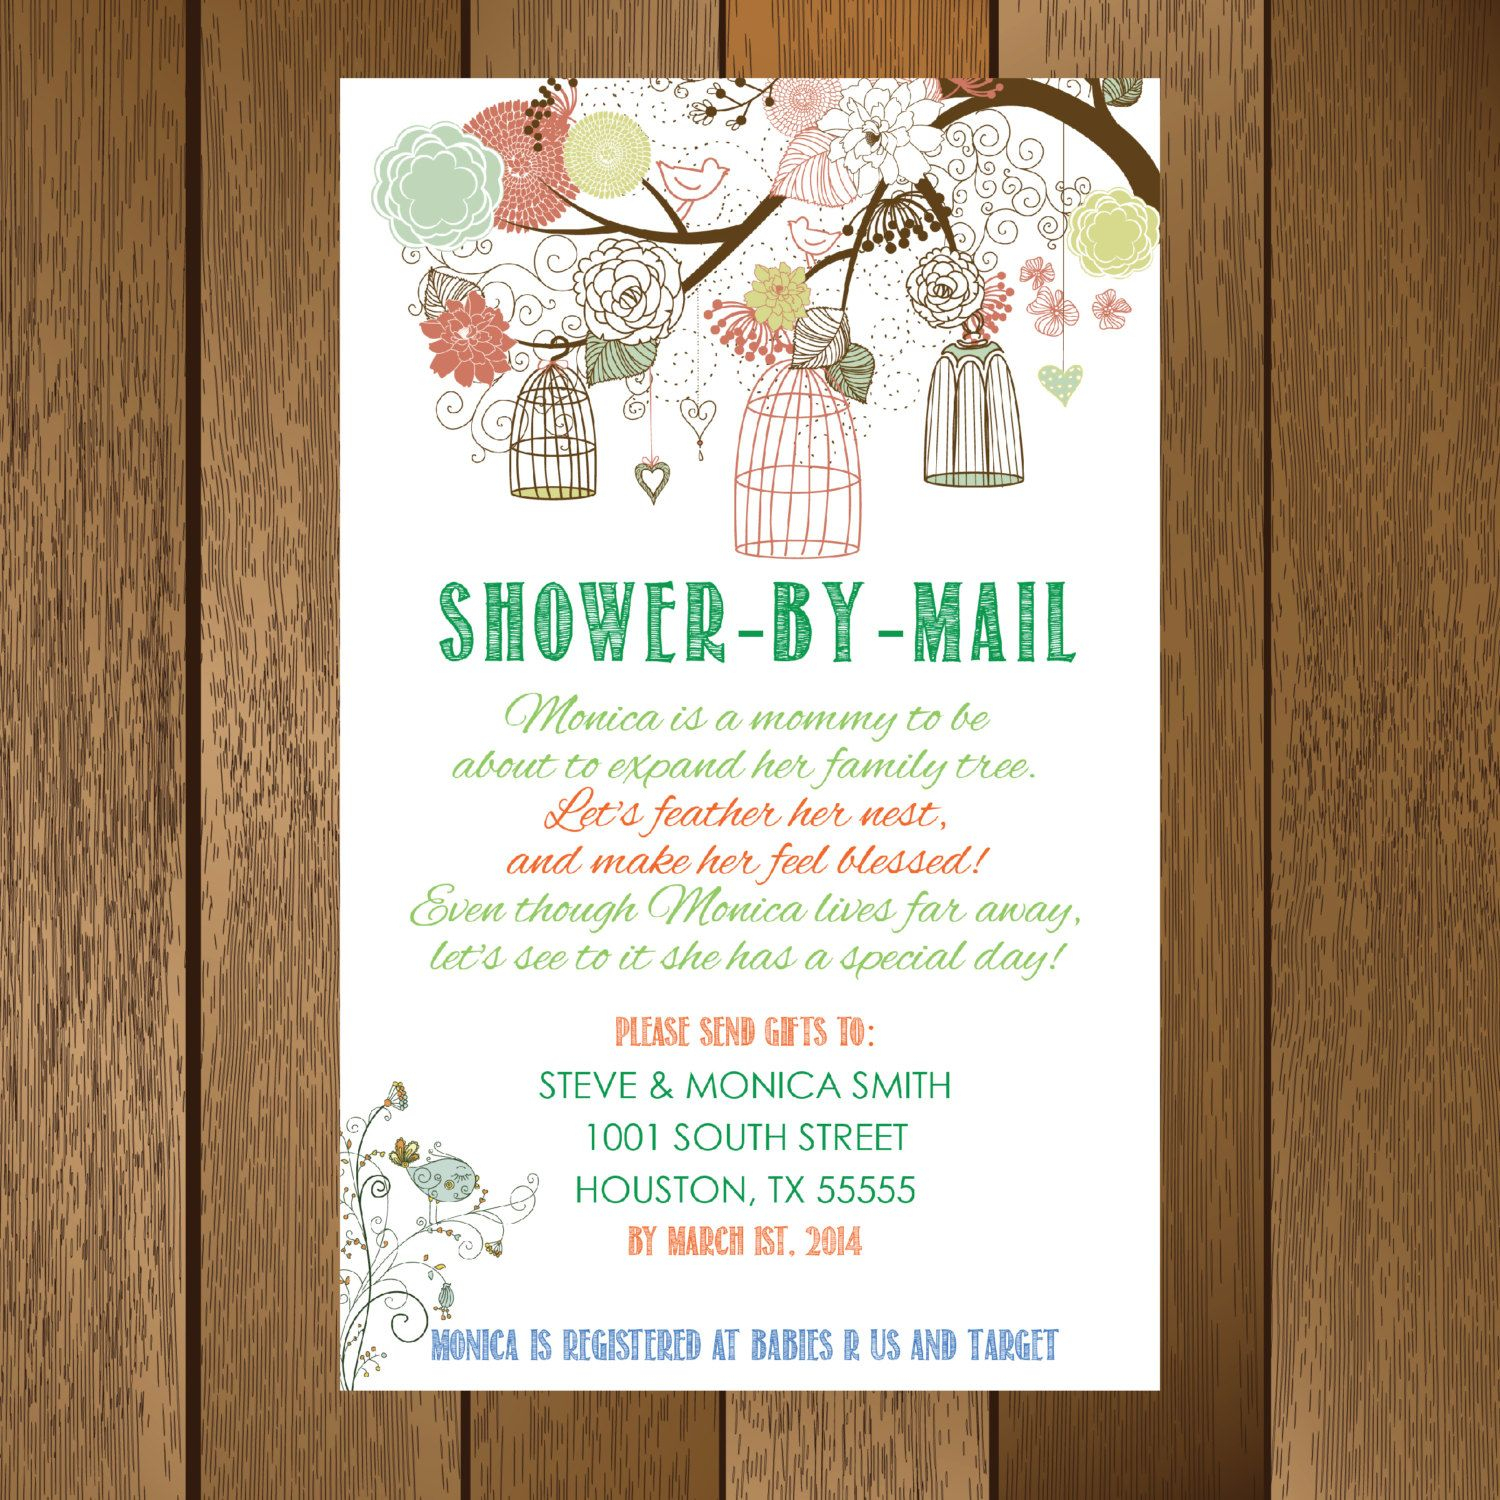 10 Nice Baby Shower By Mail Ideas rustic showermail baby shower invitationdesiringjoy on the 2024